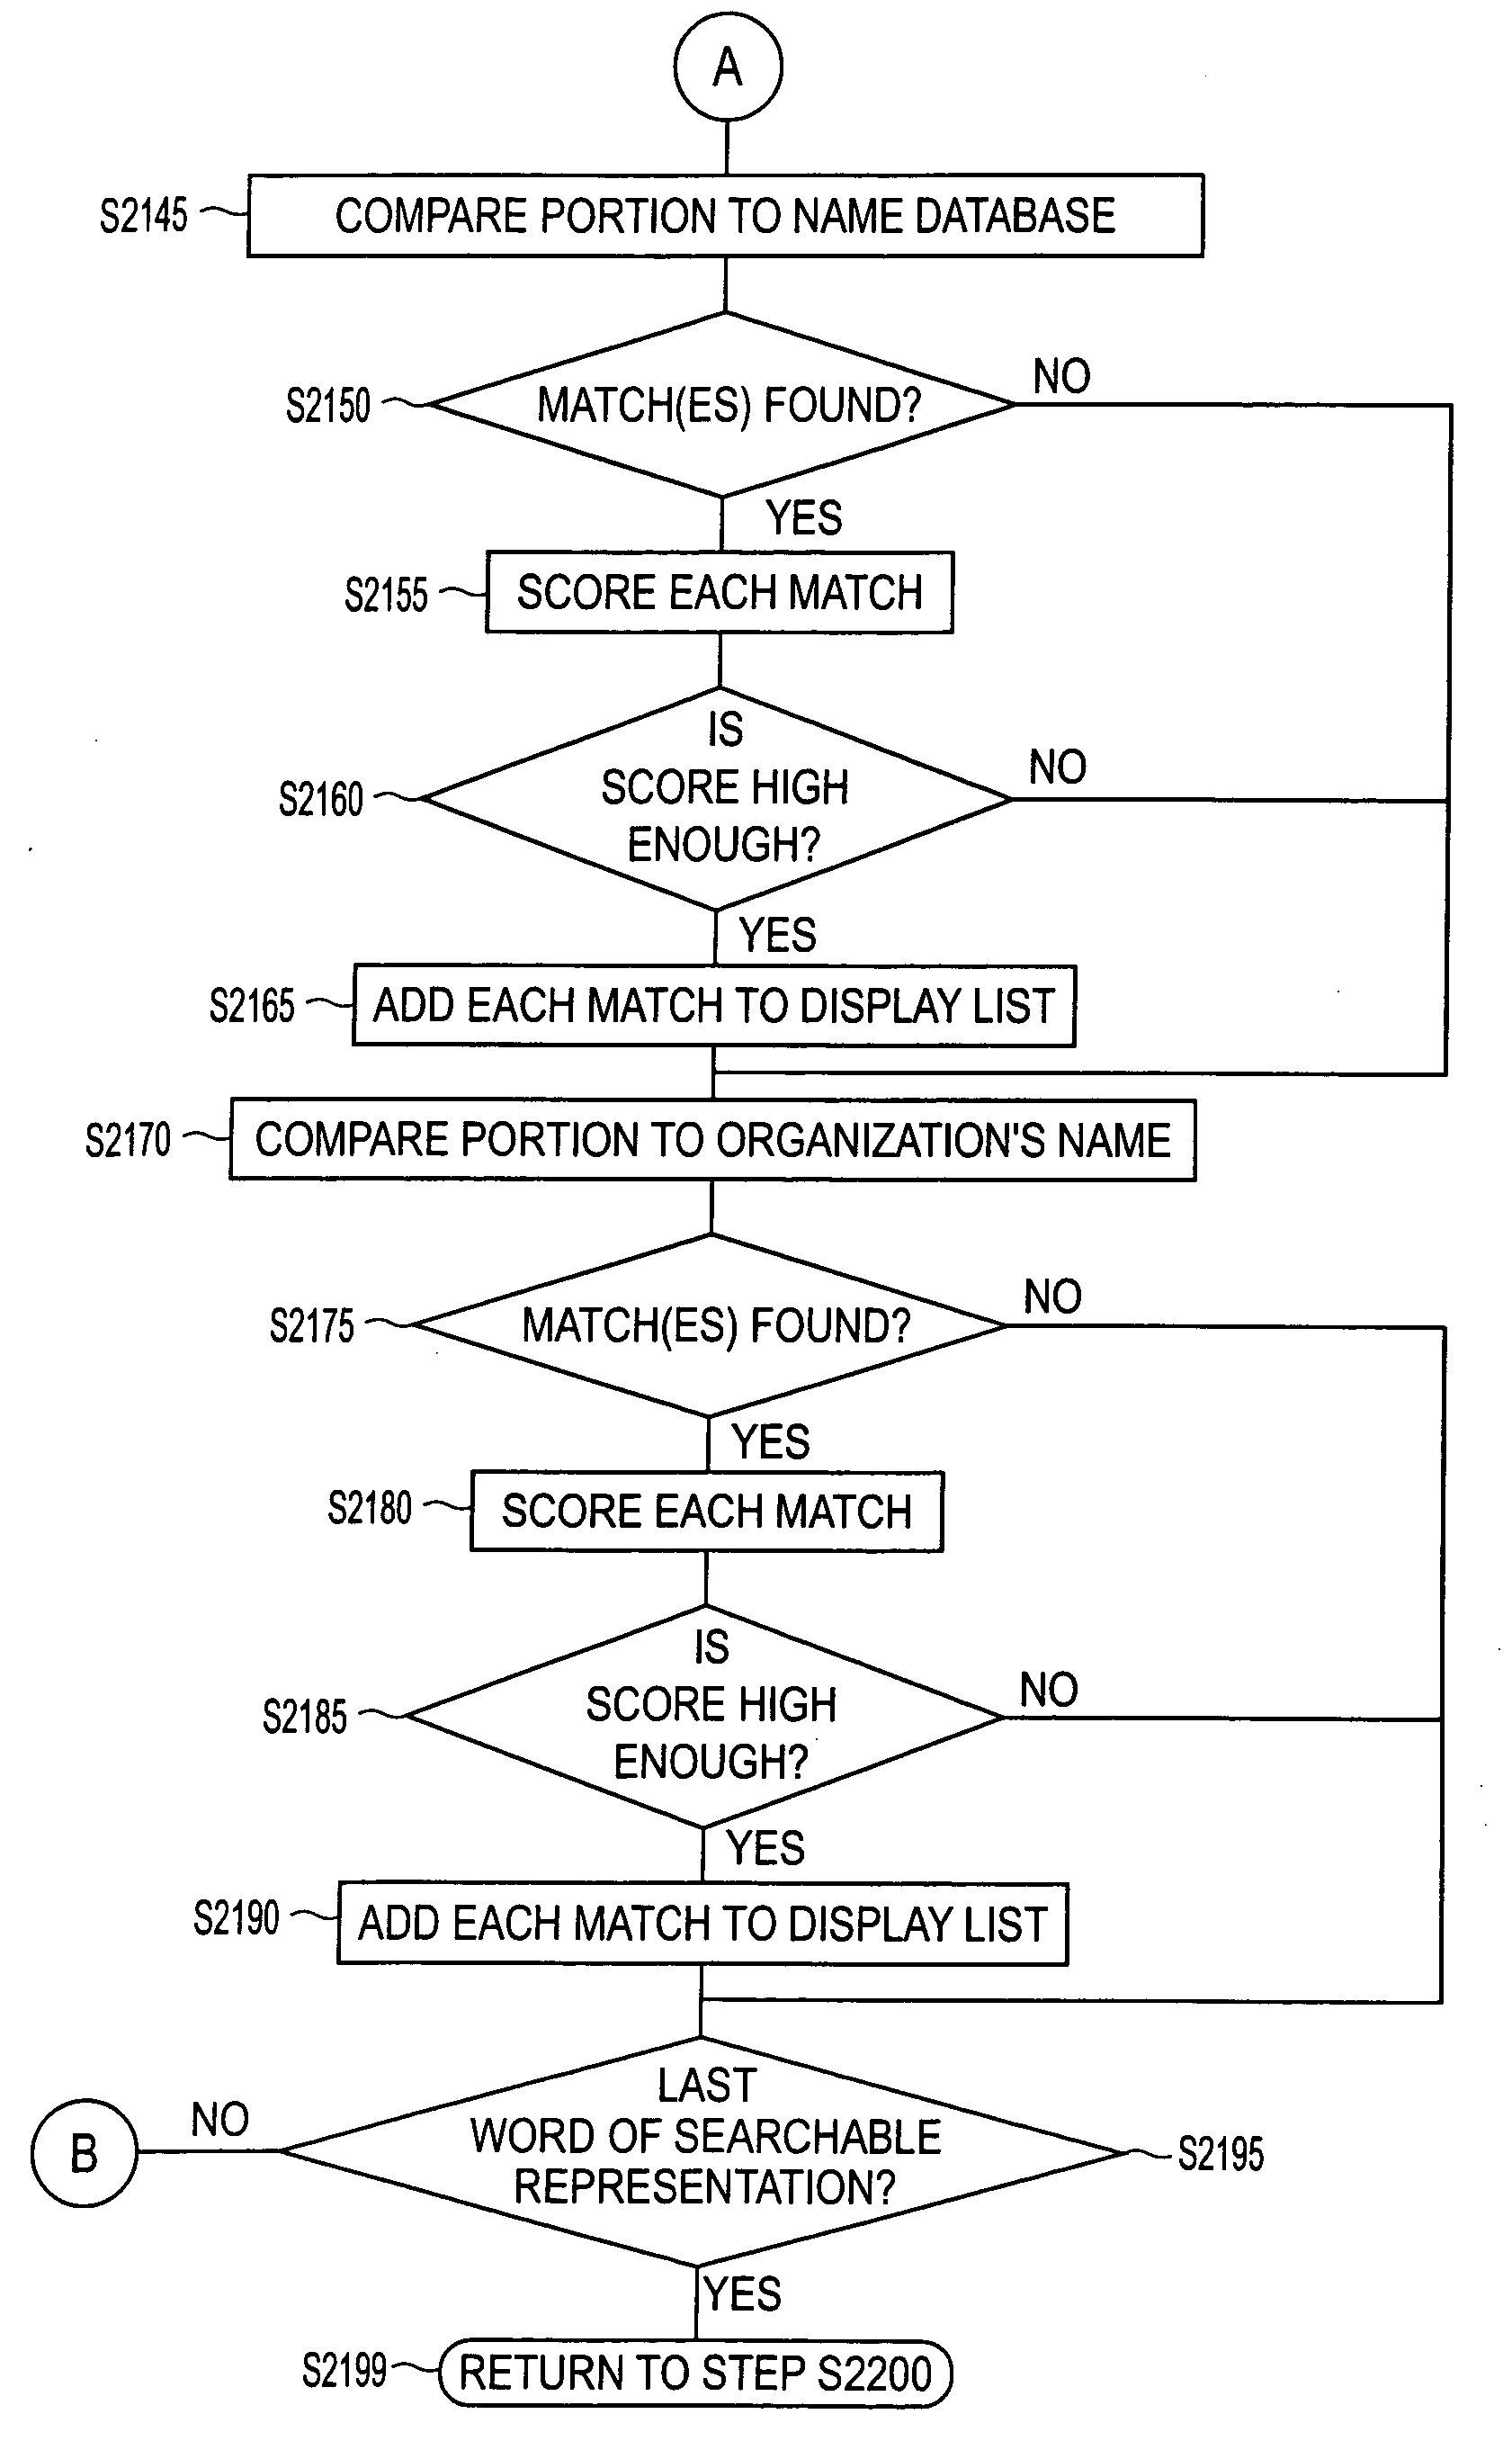 Context-based contact information retrieval systems and methods